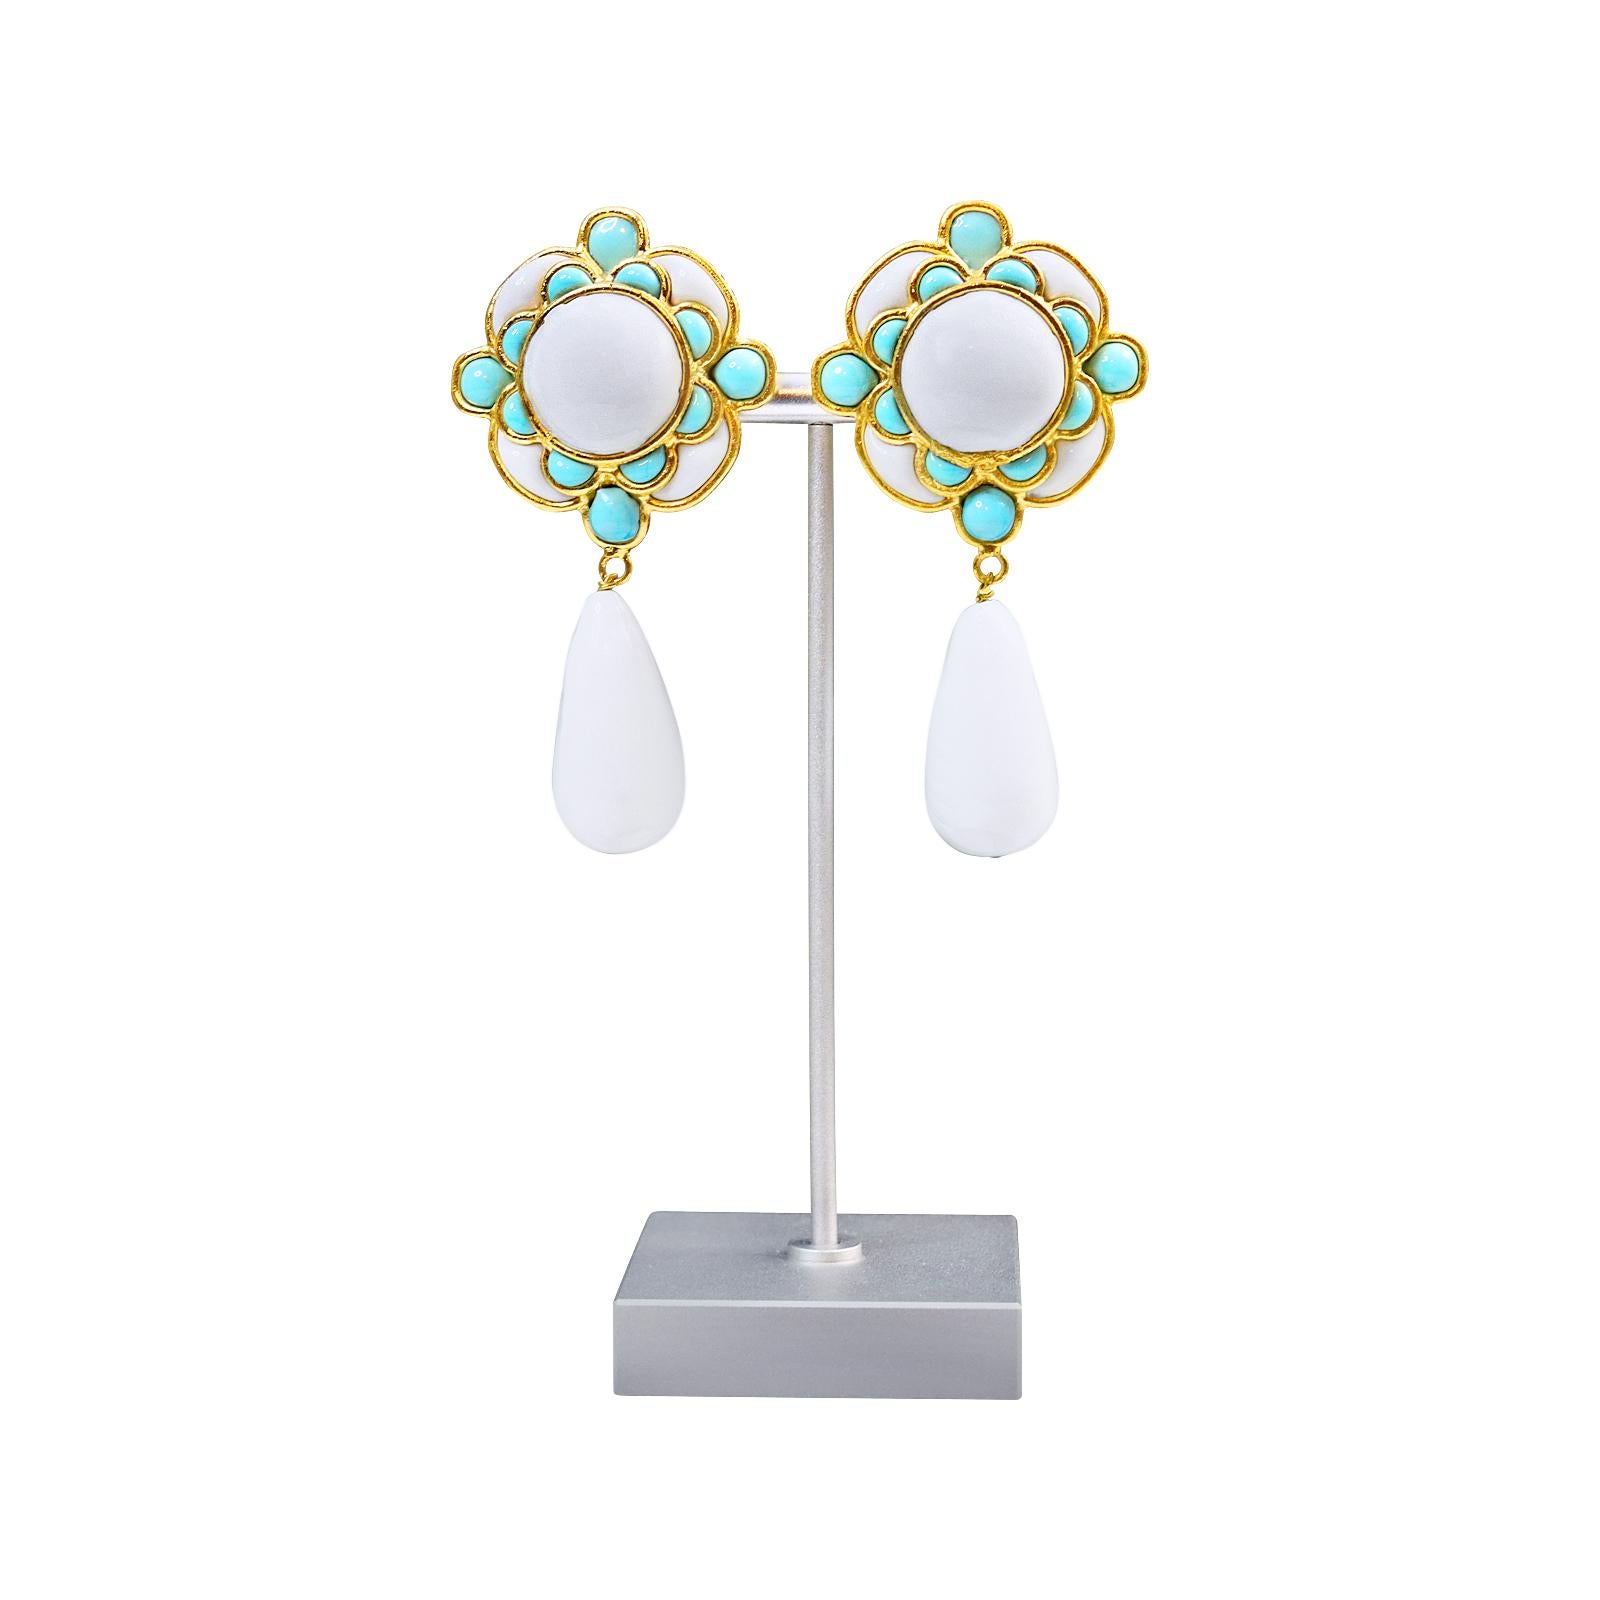 Vintage Maison Gripoix Faux Turquoise and White Dangling Earrings Circa 1980s In Good Condition For Sale In New York, NY